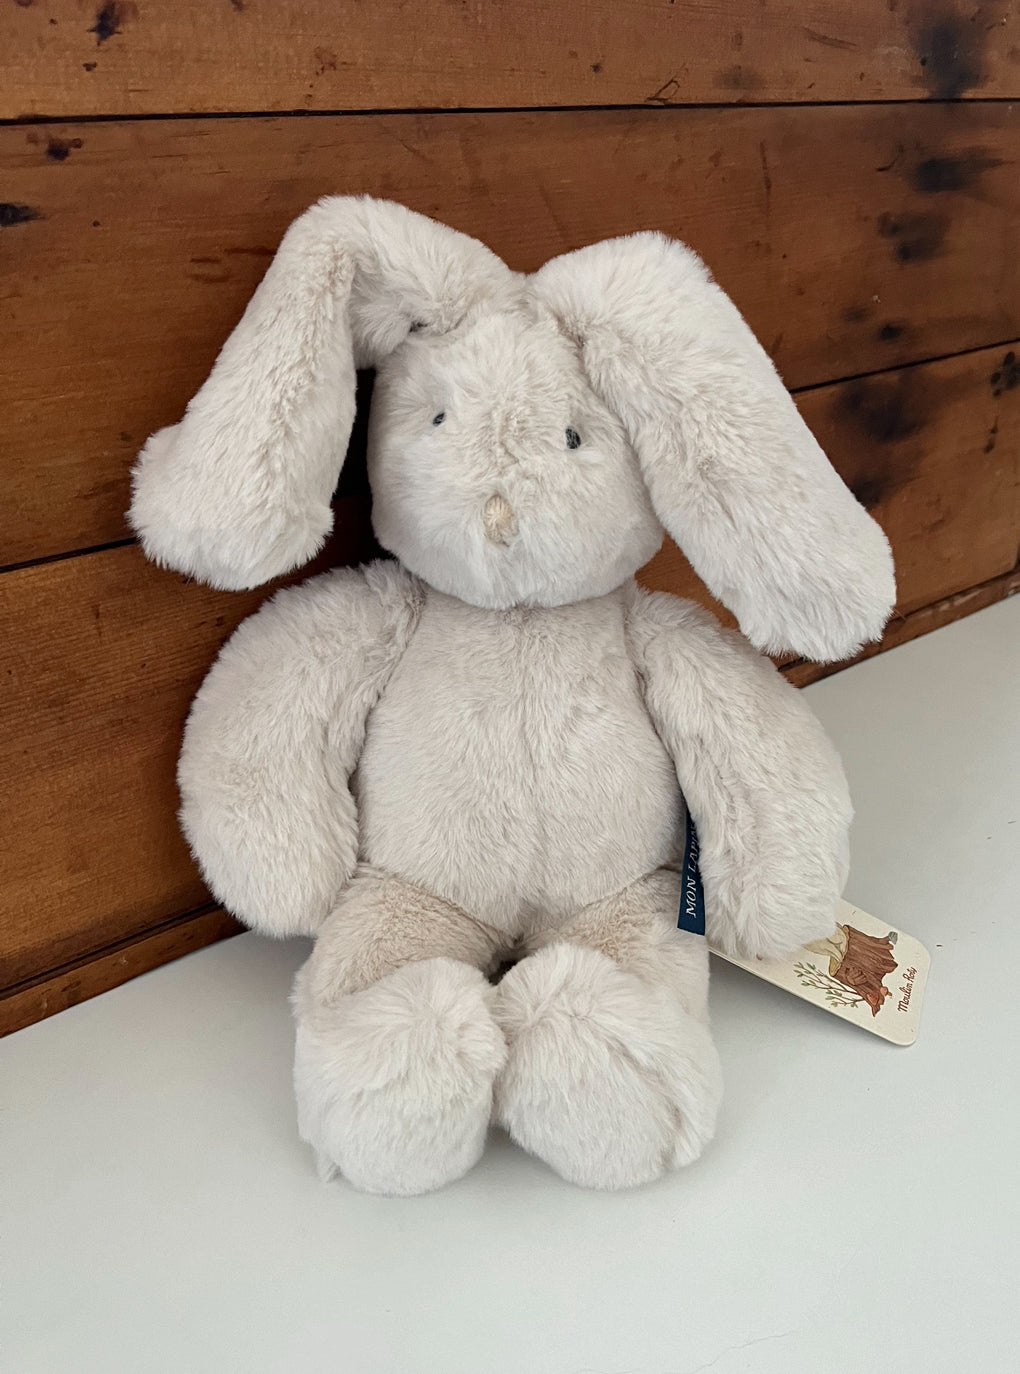 Soft Stuffed Animal for Baby - RABBIT, Lop-eared CREAM Lapin Loison!